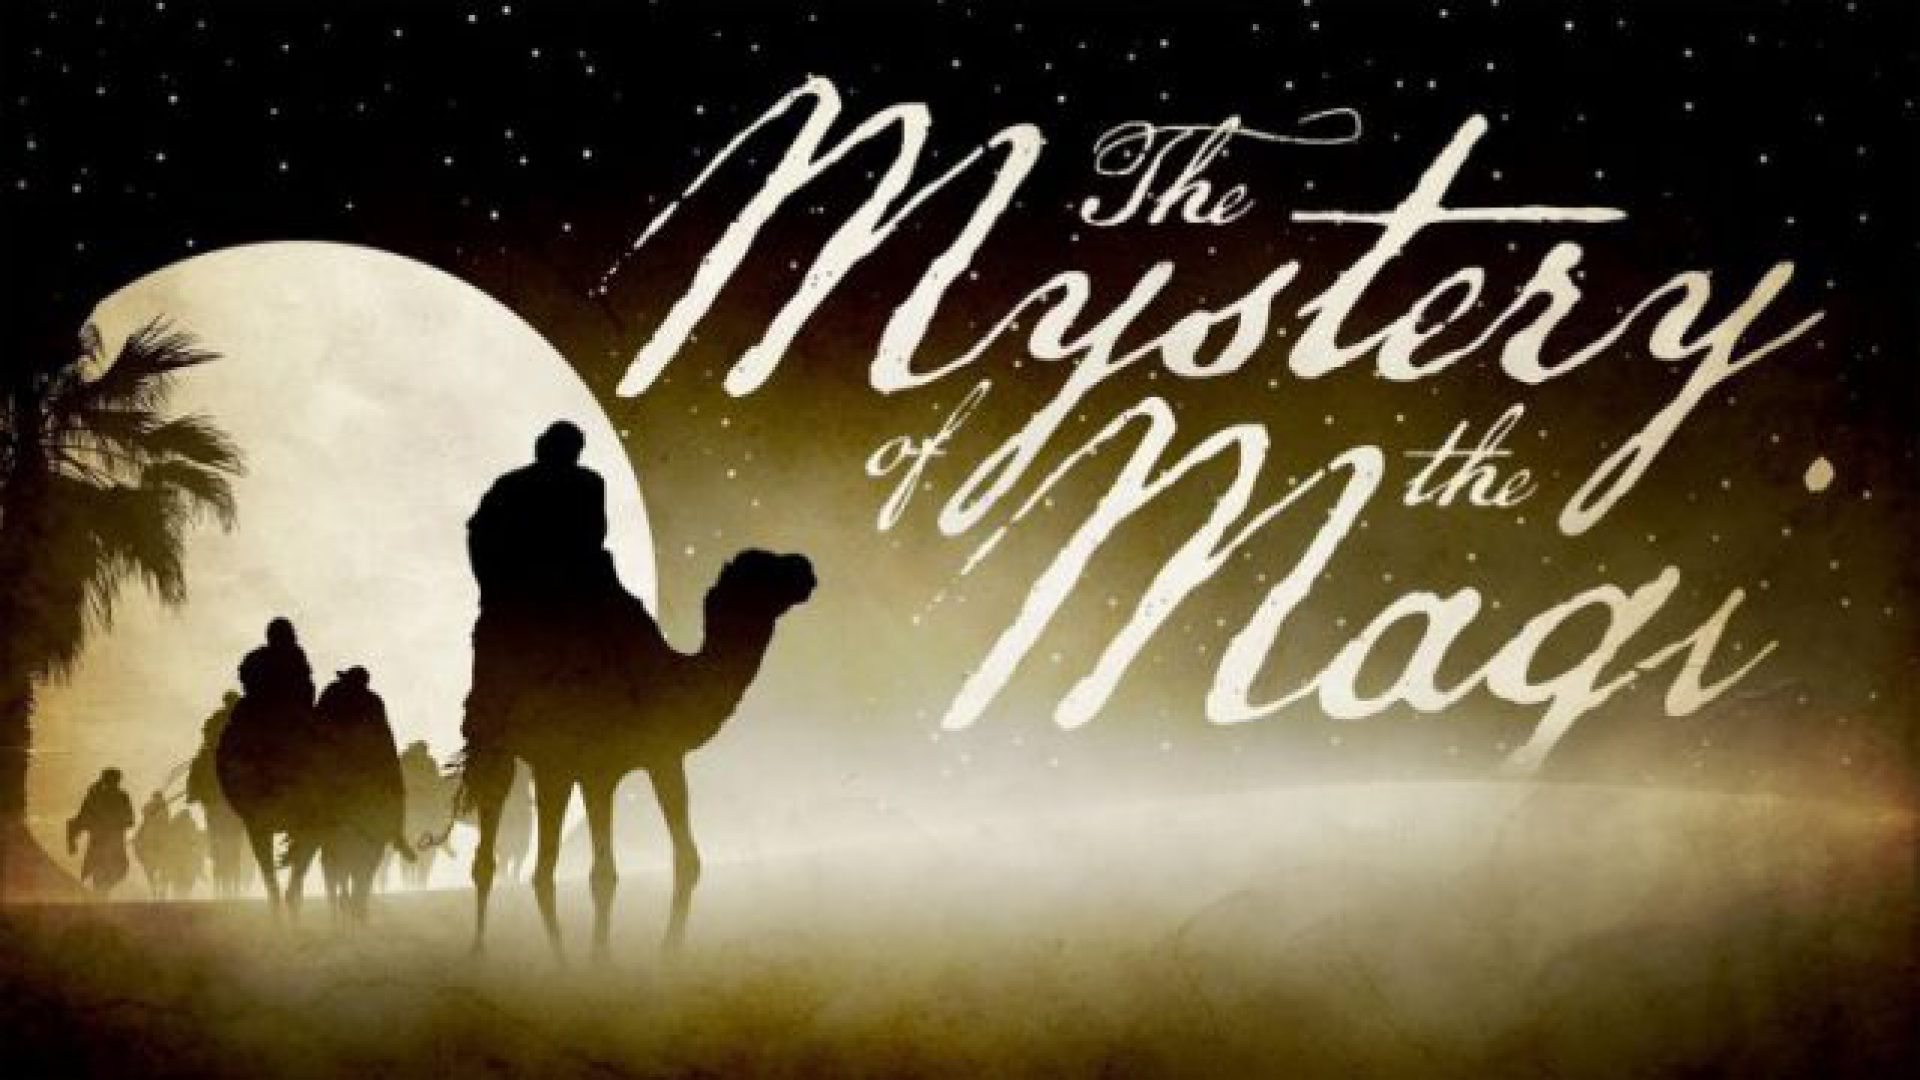 THE MYSTERY OF THE MAGI